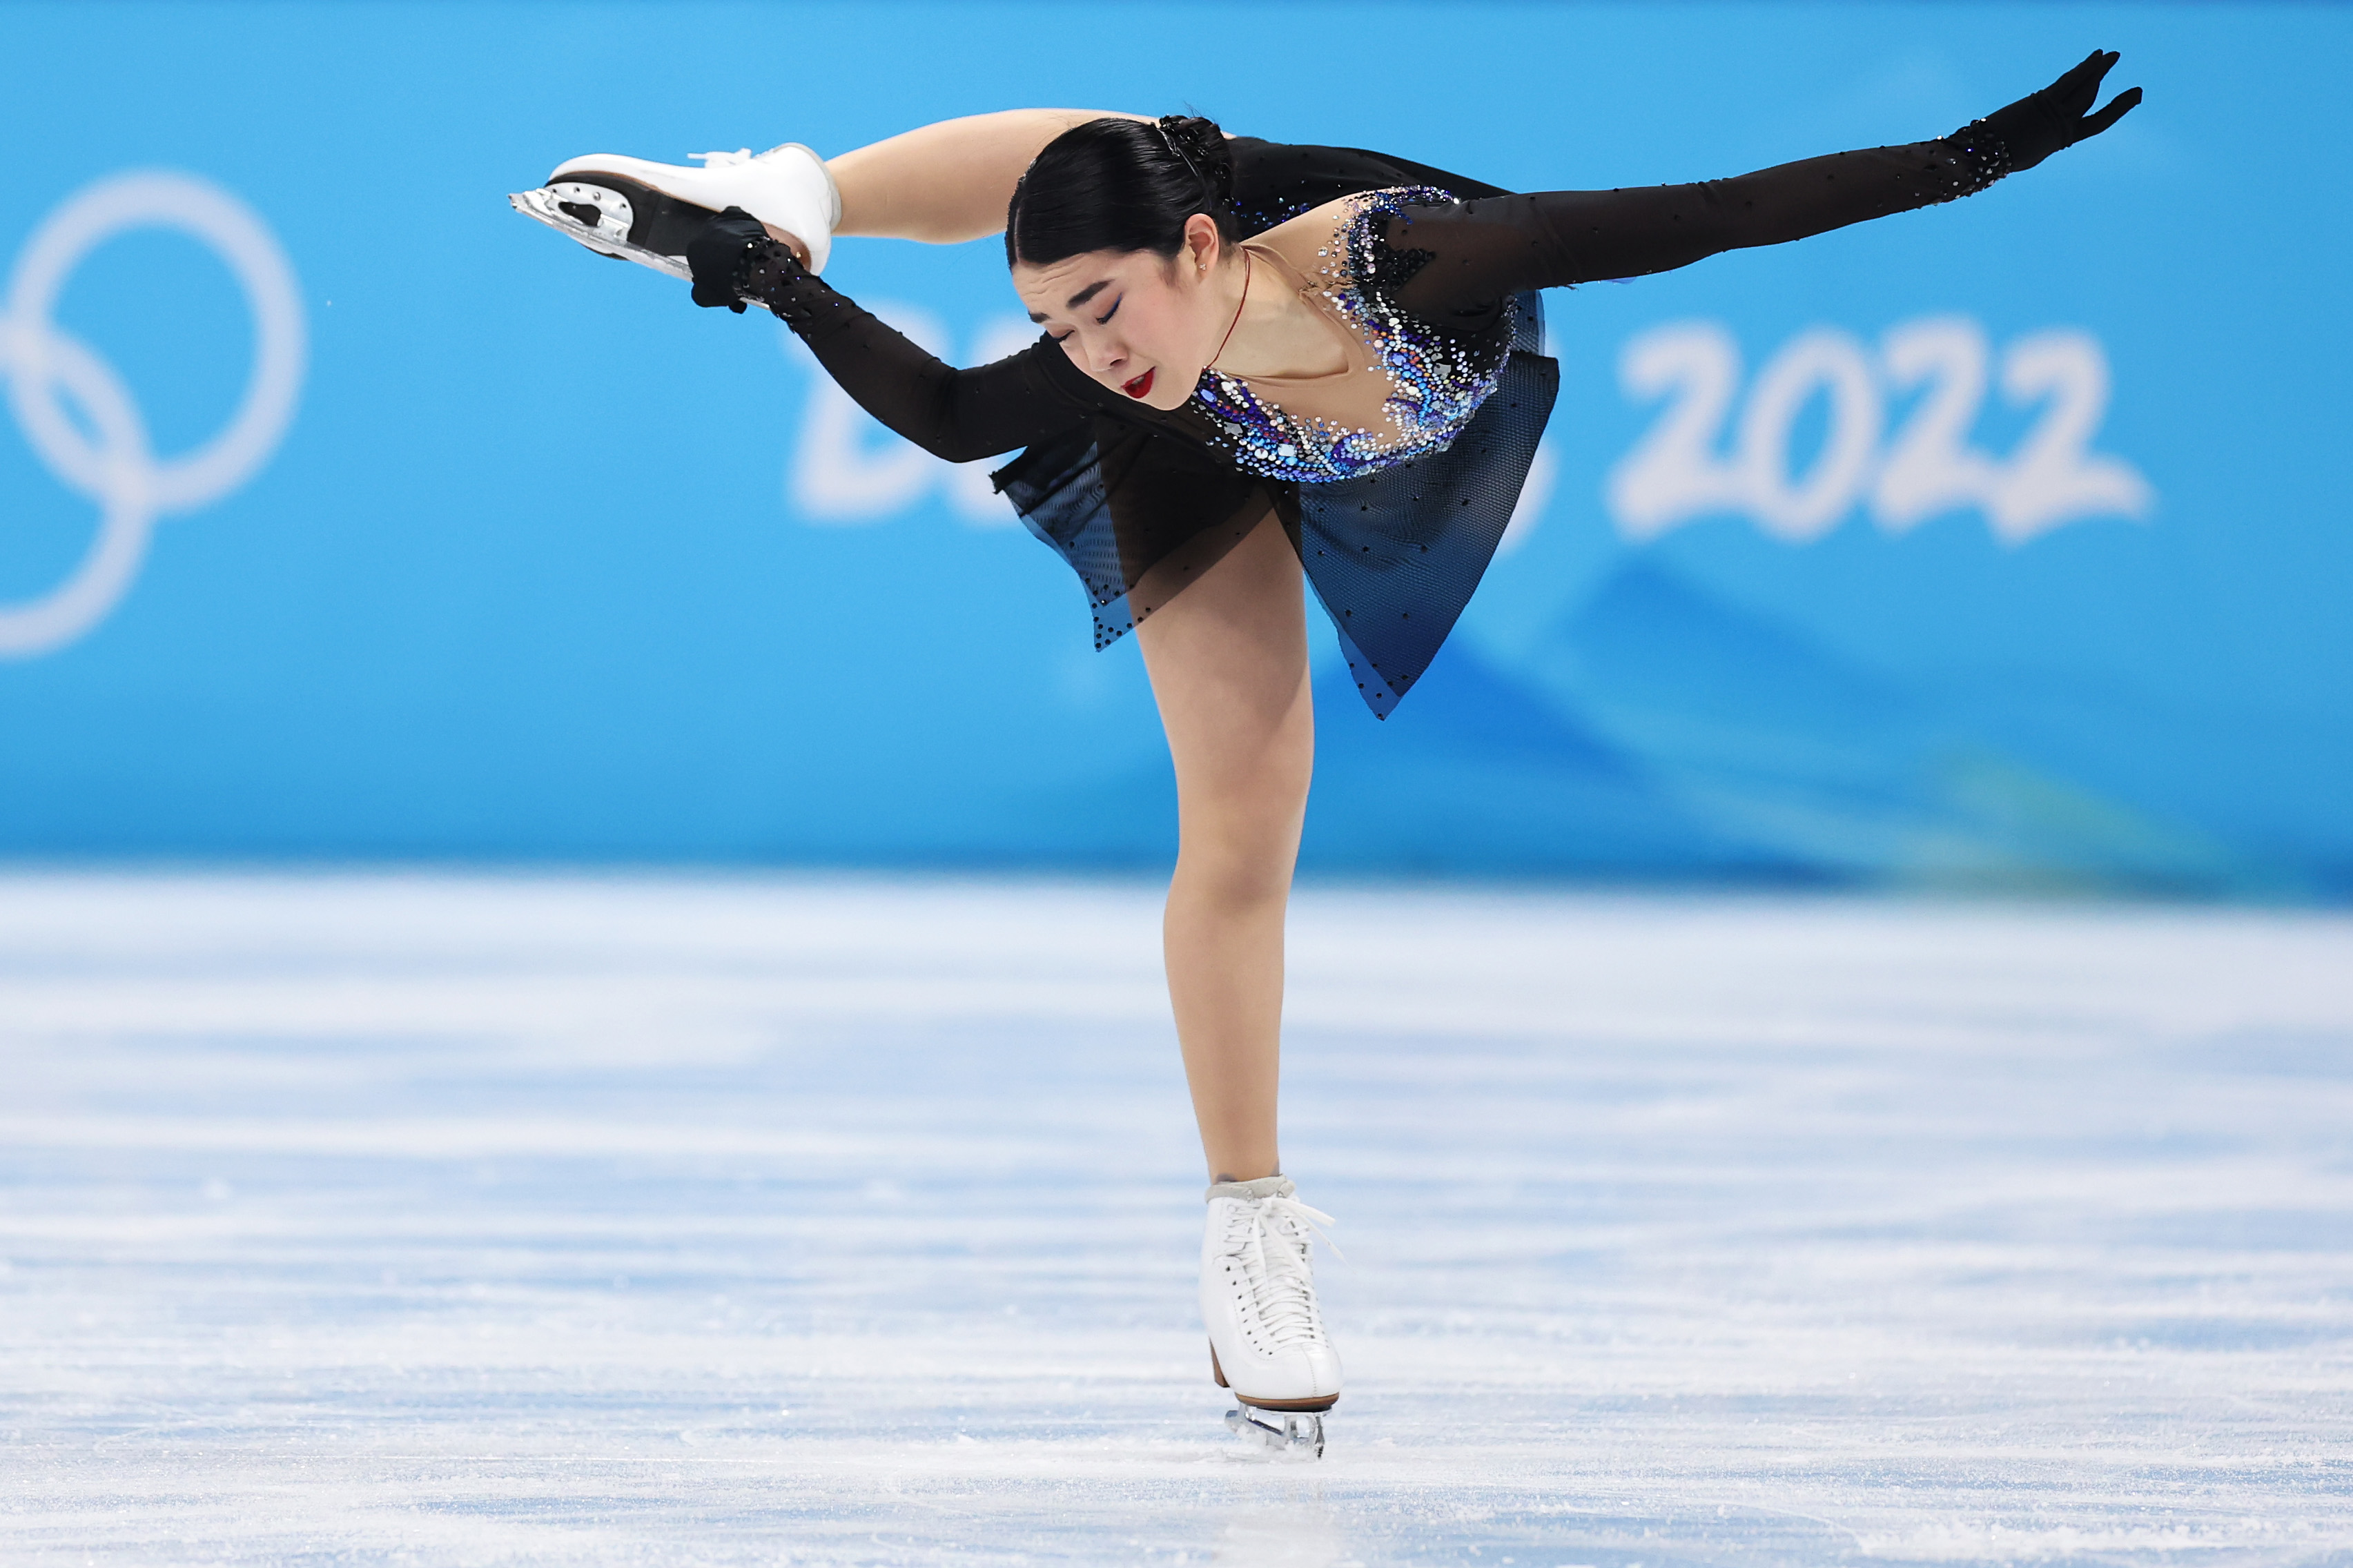 Grace under pressure Figure skater Karen Chen falls short in first performance of individual Olympic finals